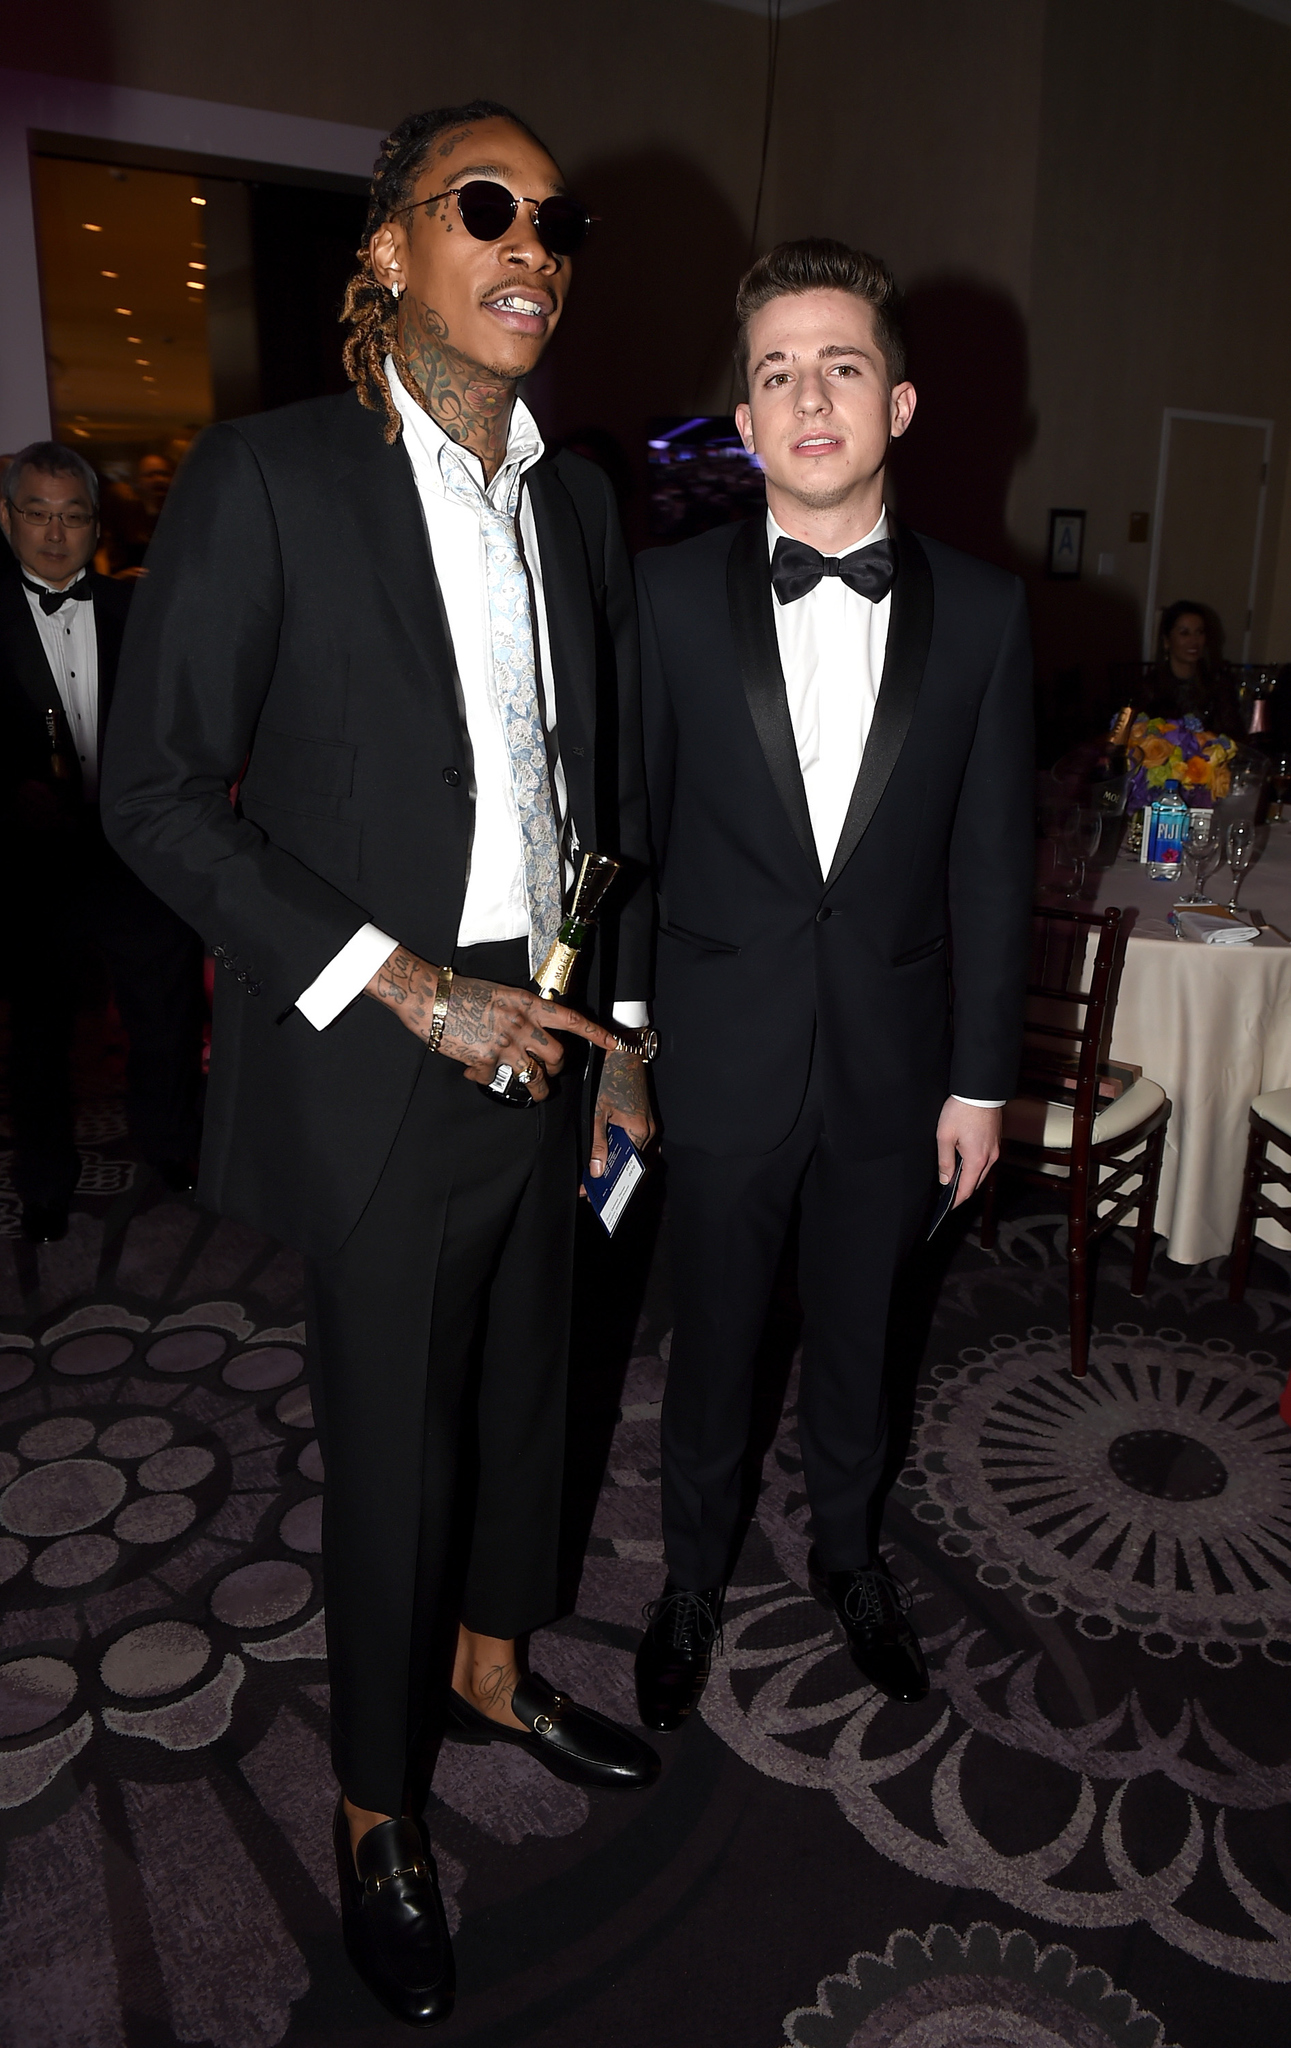 Wiz Khalifa and Charlie Puth at event of Golden Globes (1989)